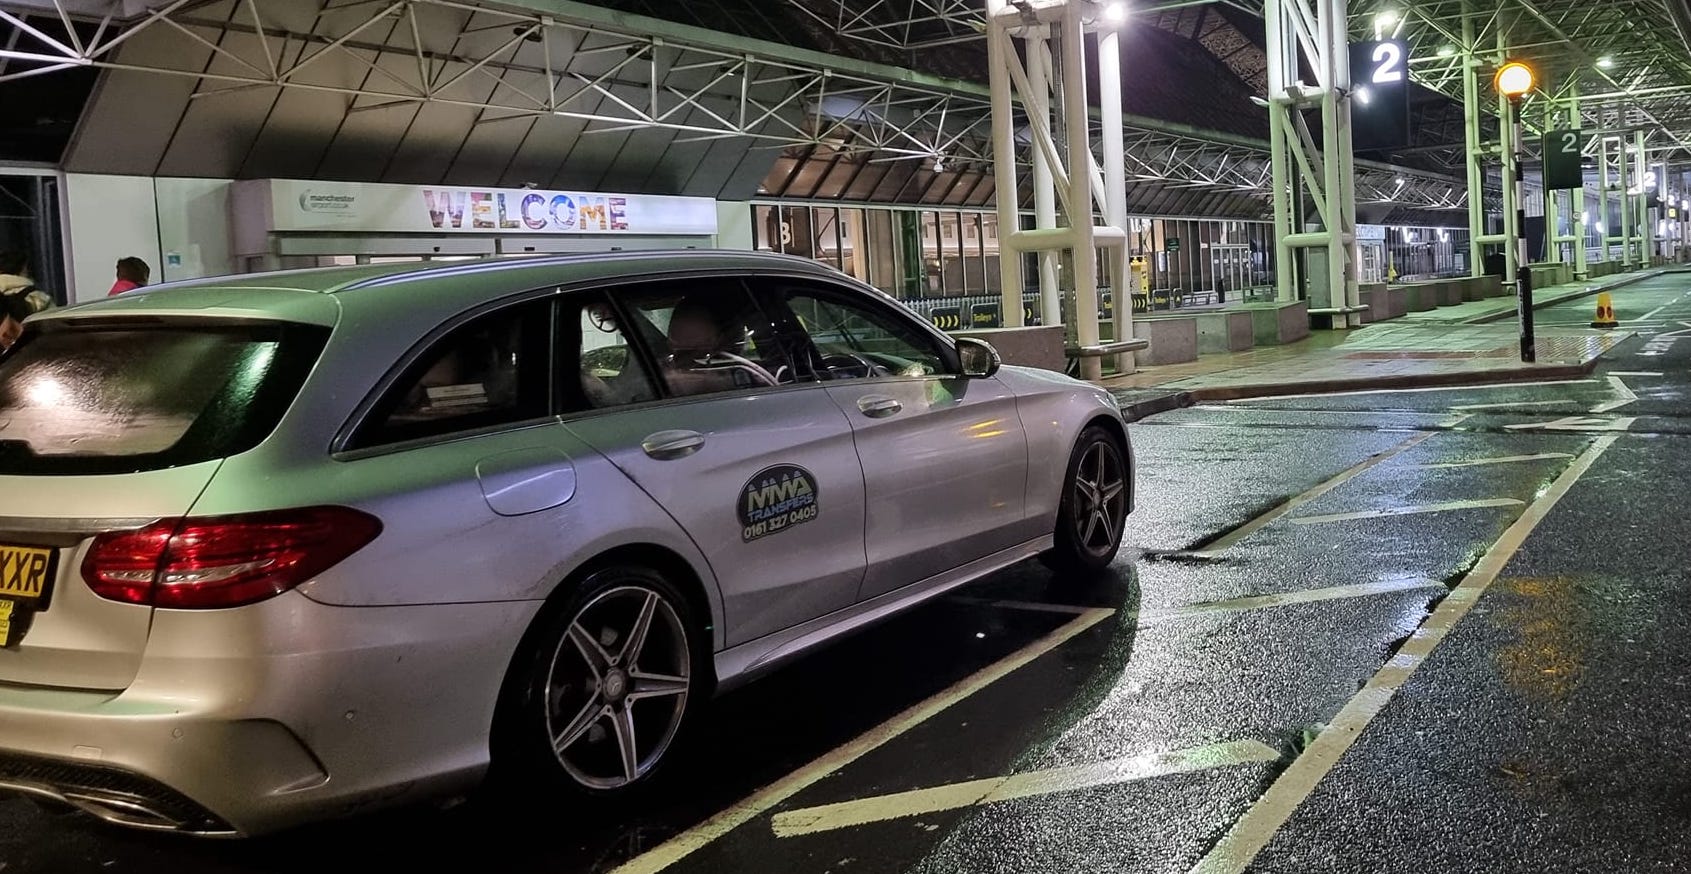 Take a Taxi from Manchester Airport to Doncaster with a free Meet and Greet Service